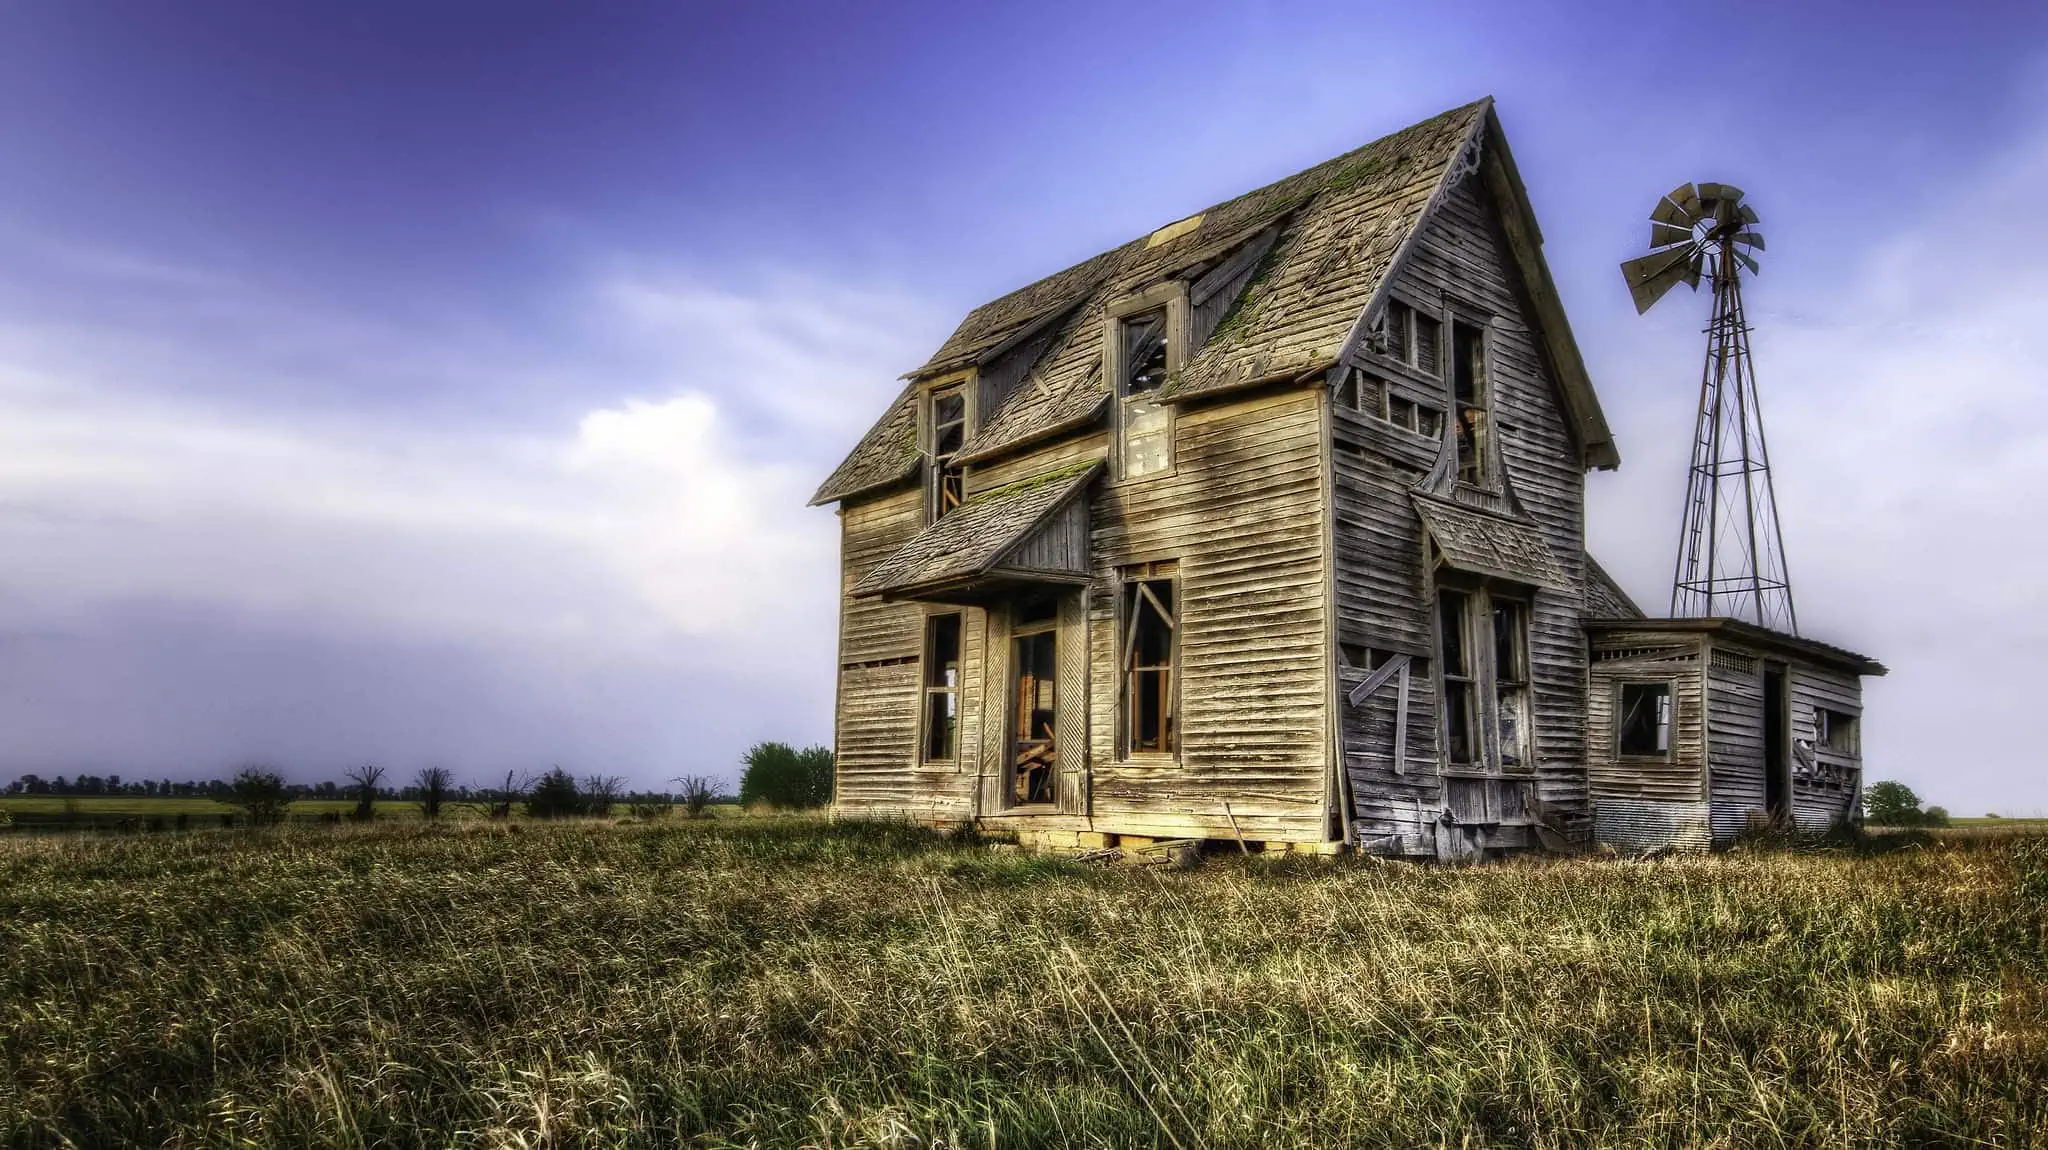 "Abandoned" by Lane Pearman licensed under CC BY 2.0